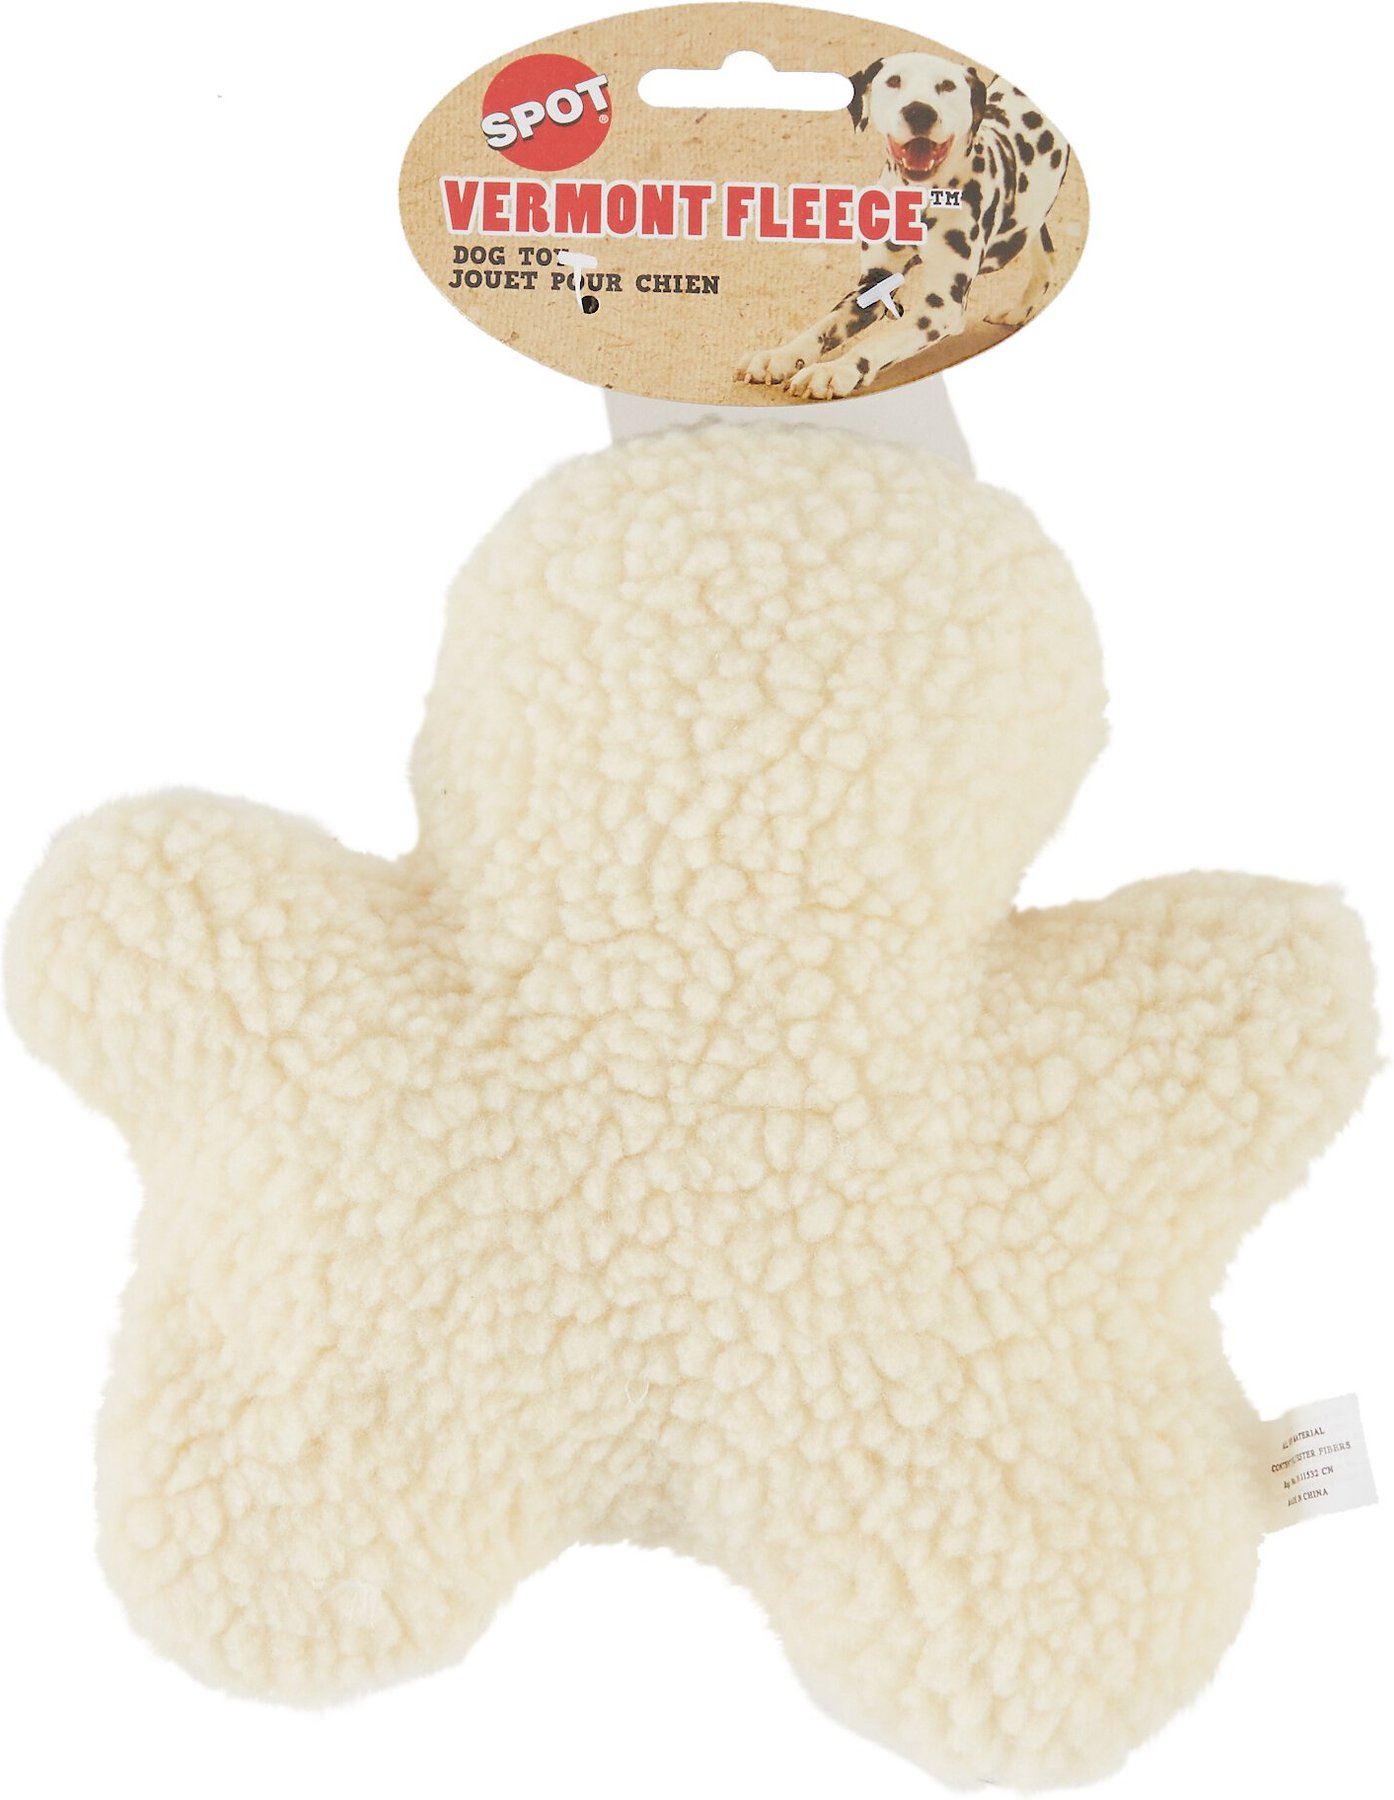 SPOT ETHICAL NATURAL PLUSH WOOLY FLEECE 8" CHEWMAN DOG TOY FREE SHIP TO THE USA